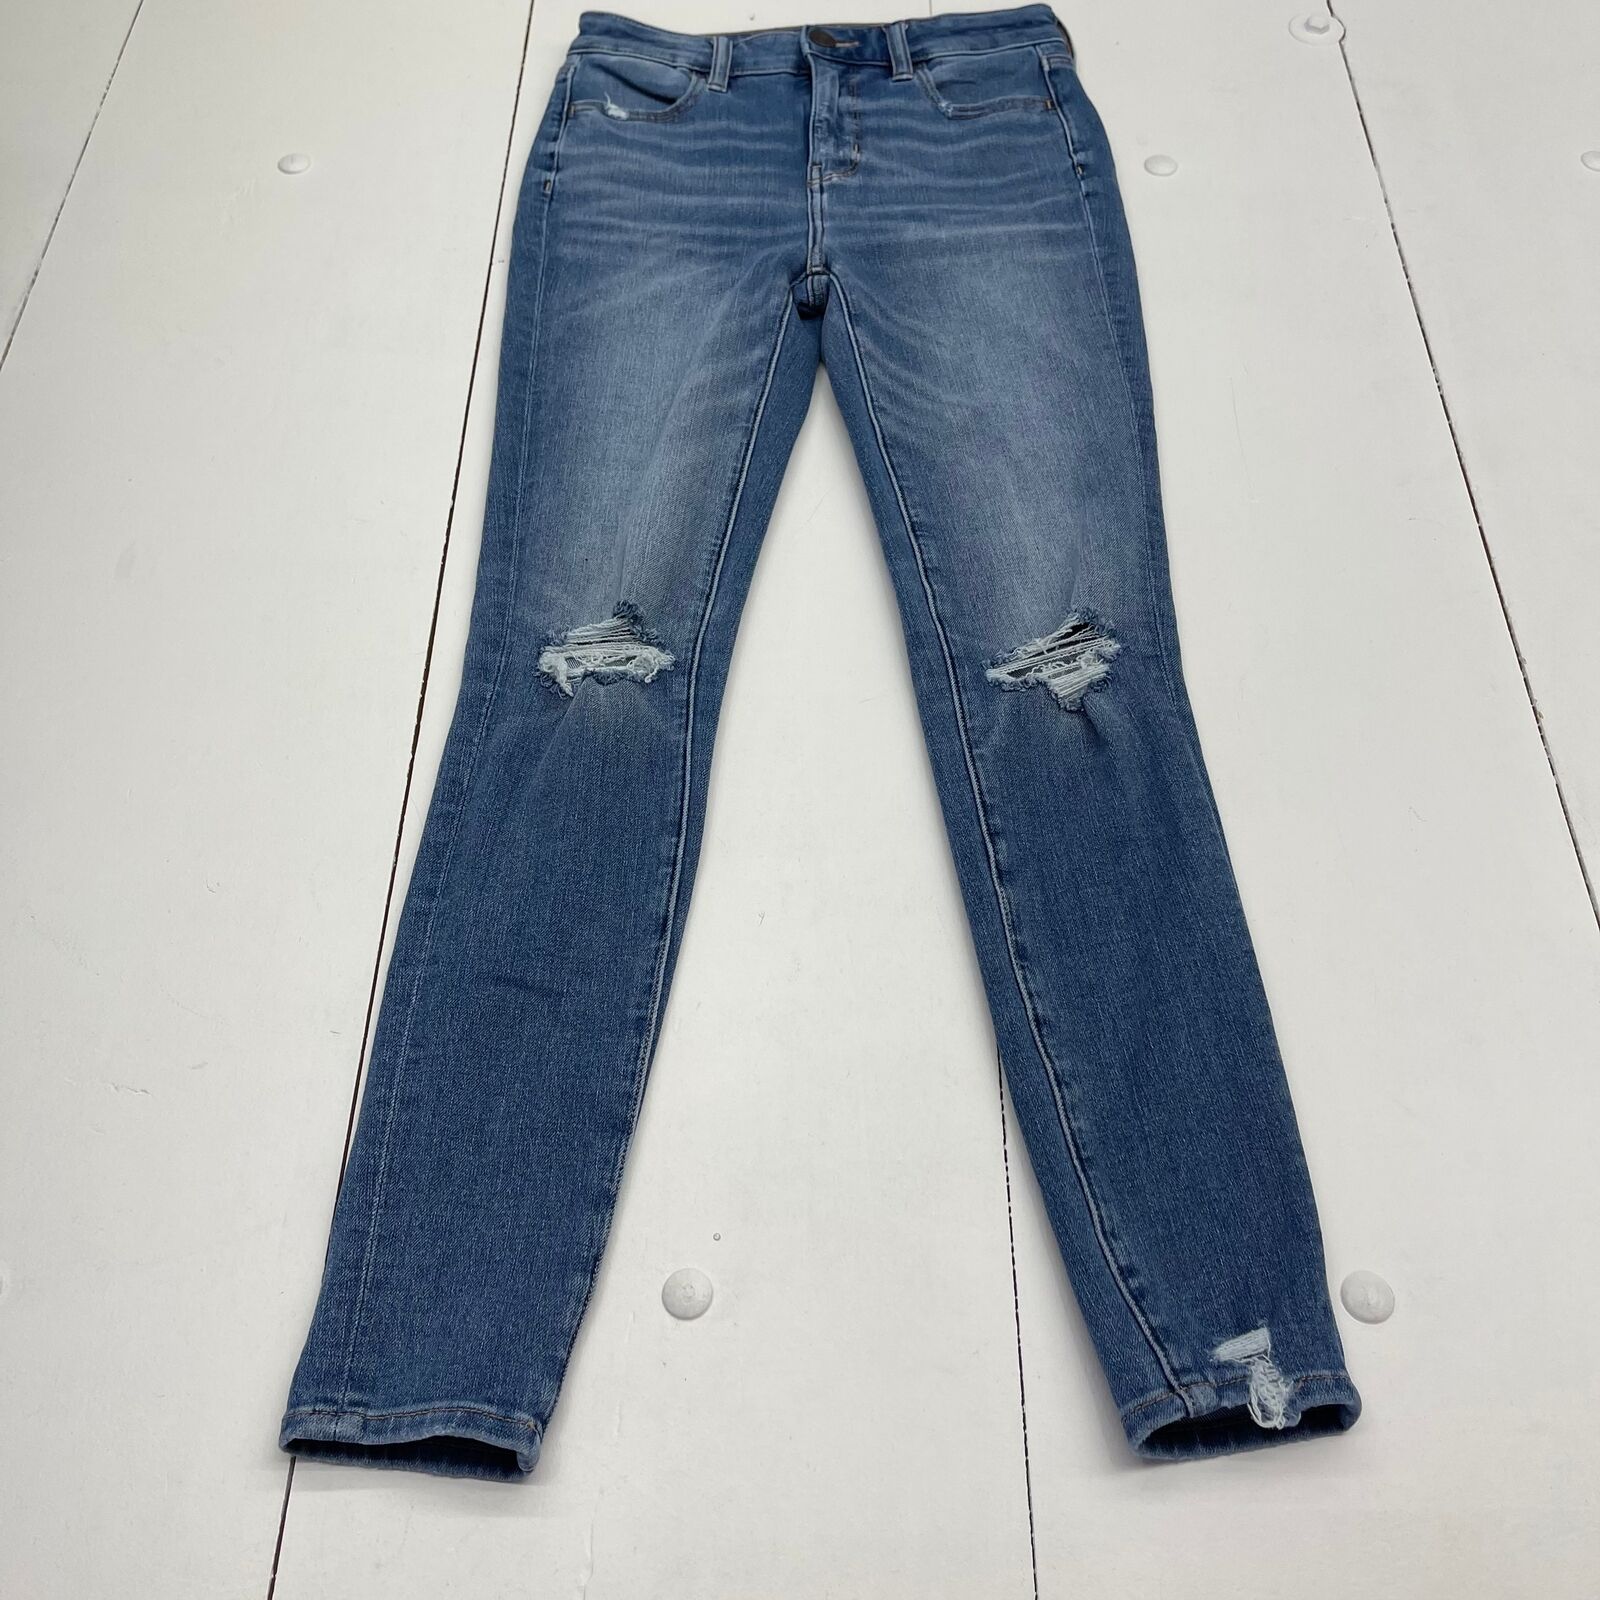 American Eagle AEO The Dream Jean High Rise Jegging Jeans Women's